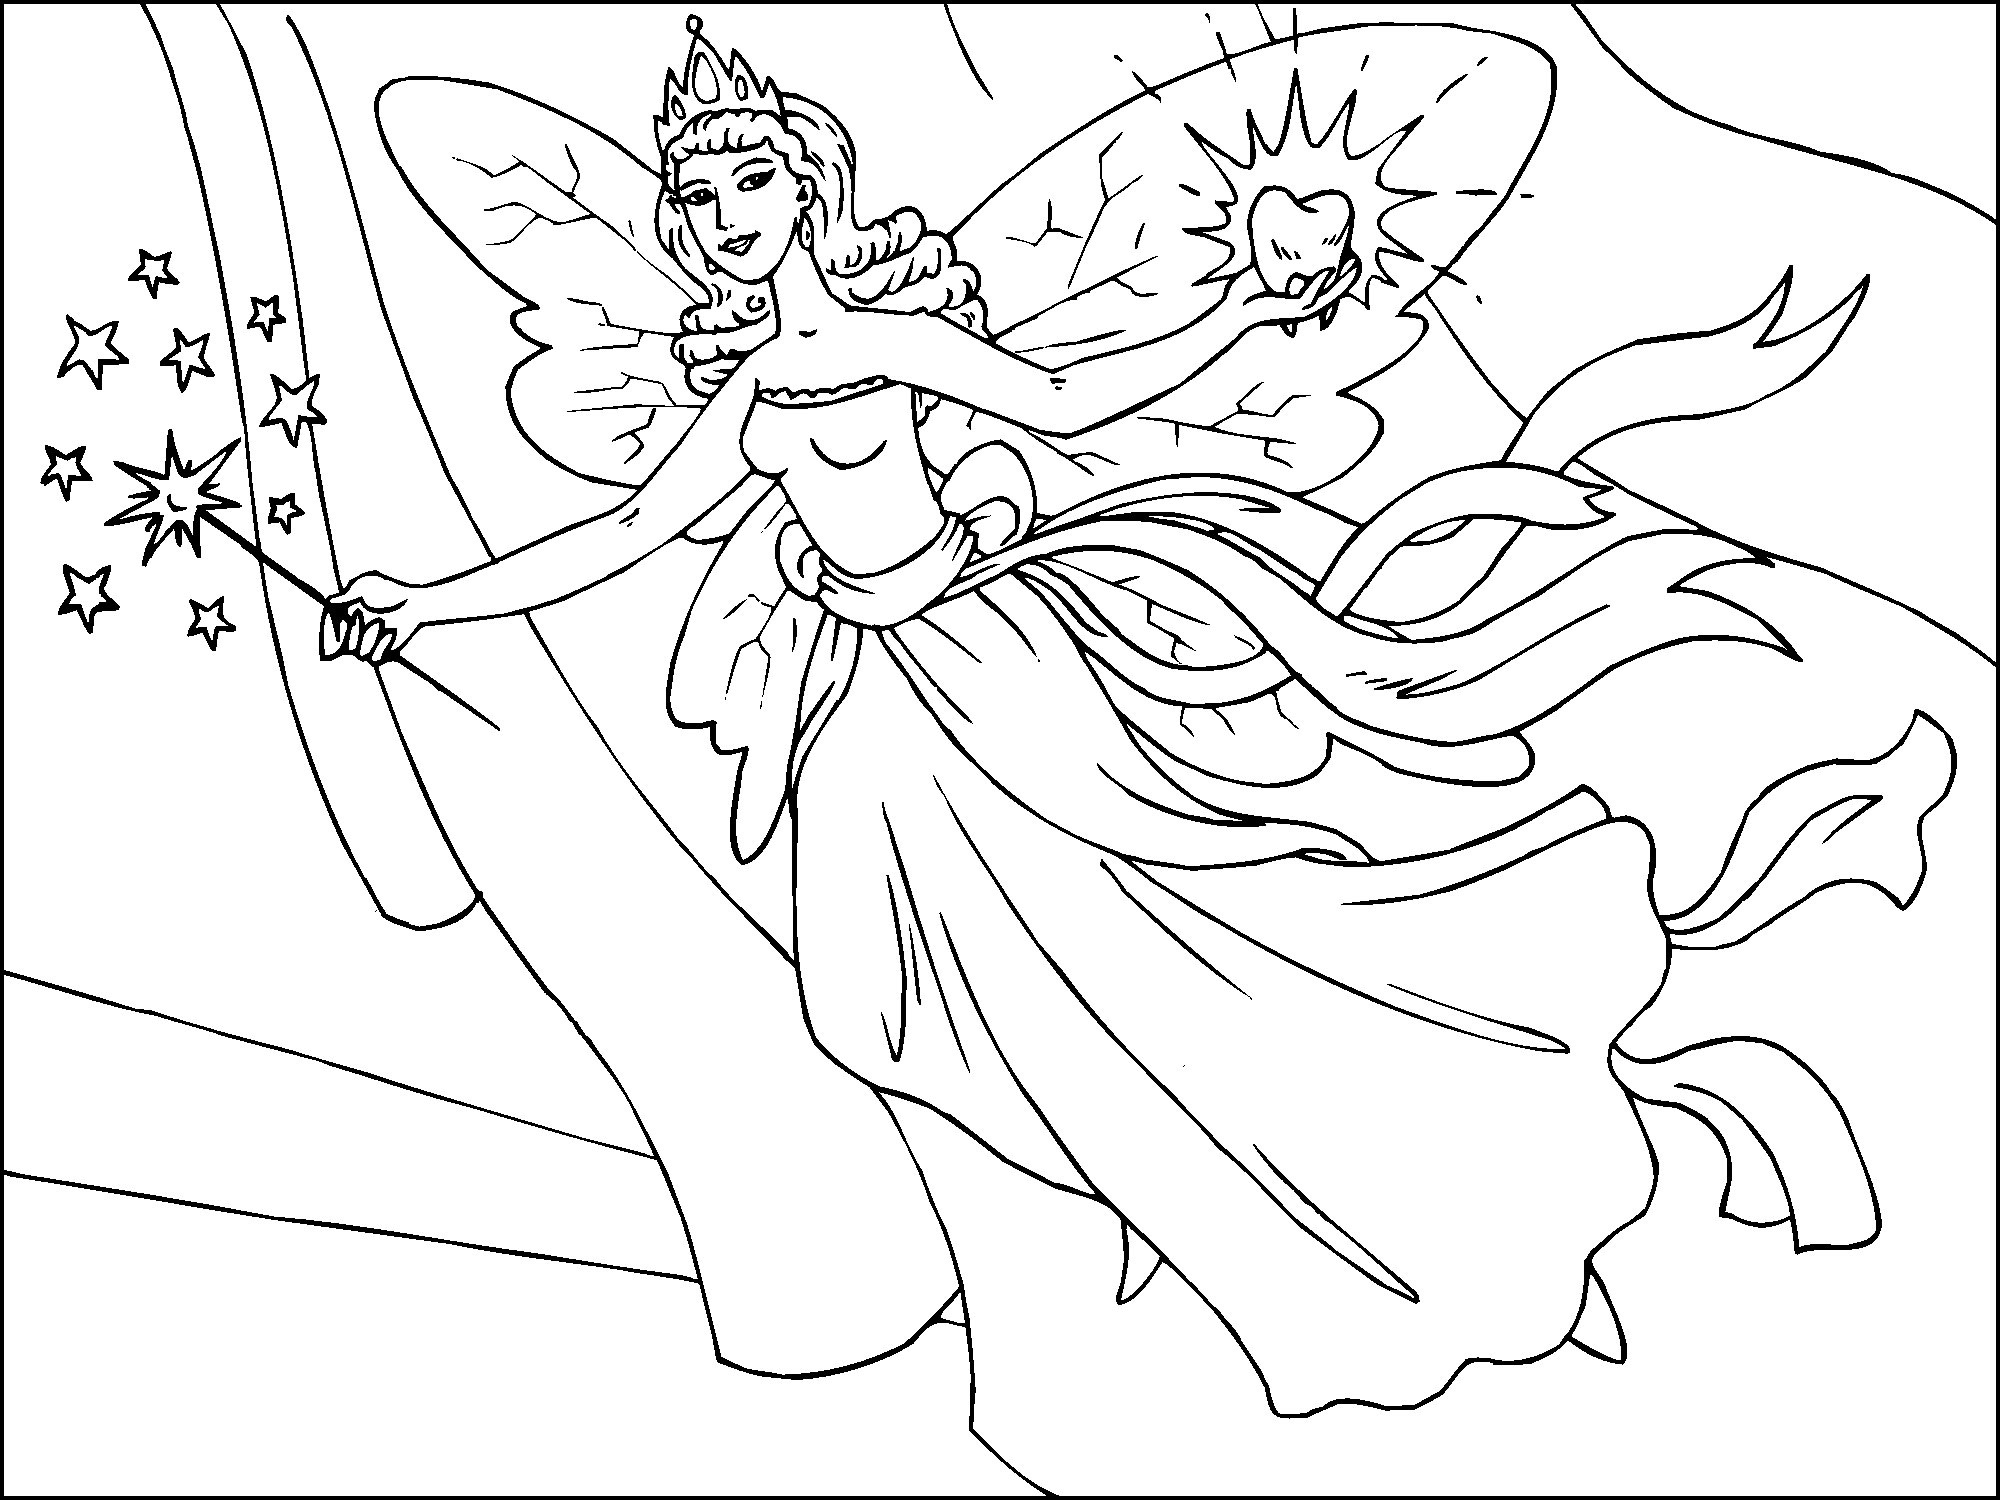 Download Free Printable Fairy Coloring Pages For Kids